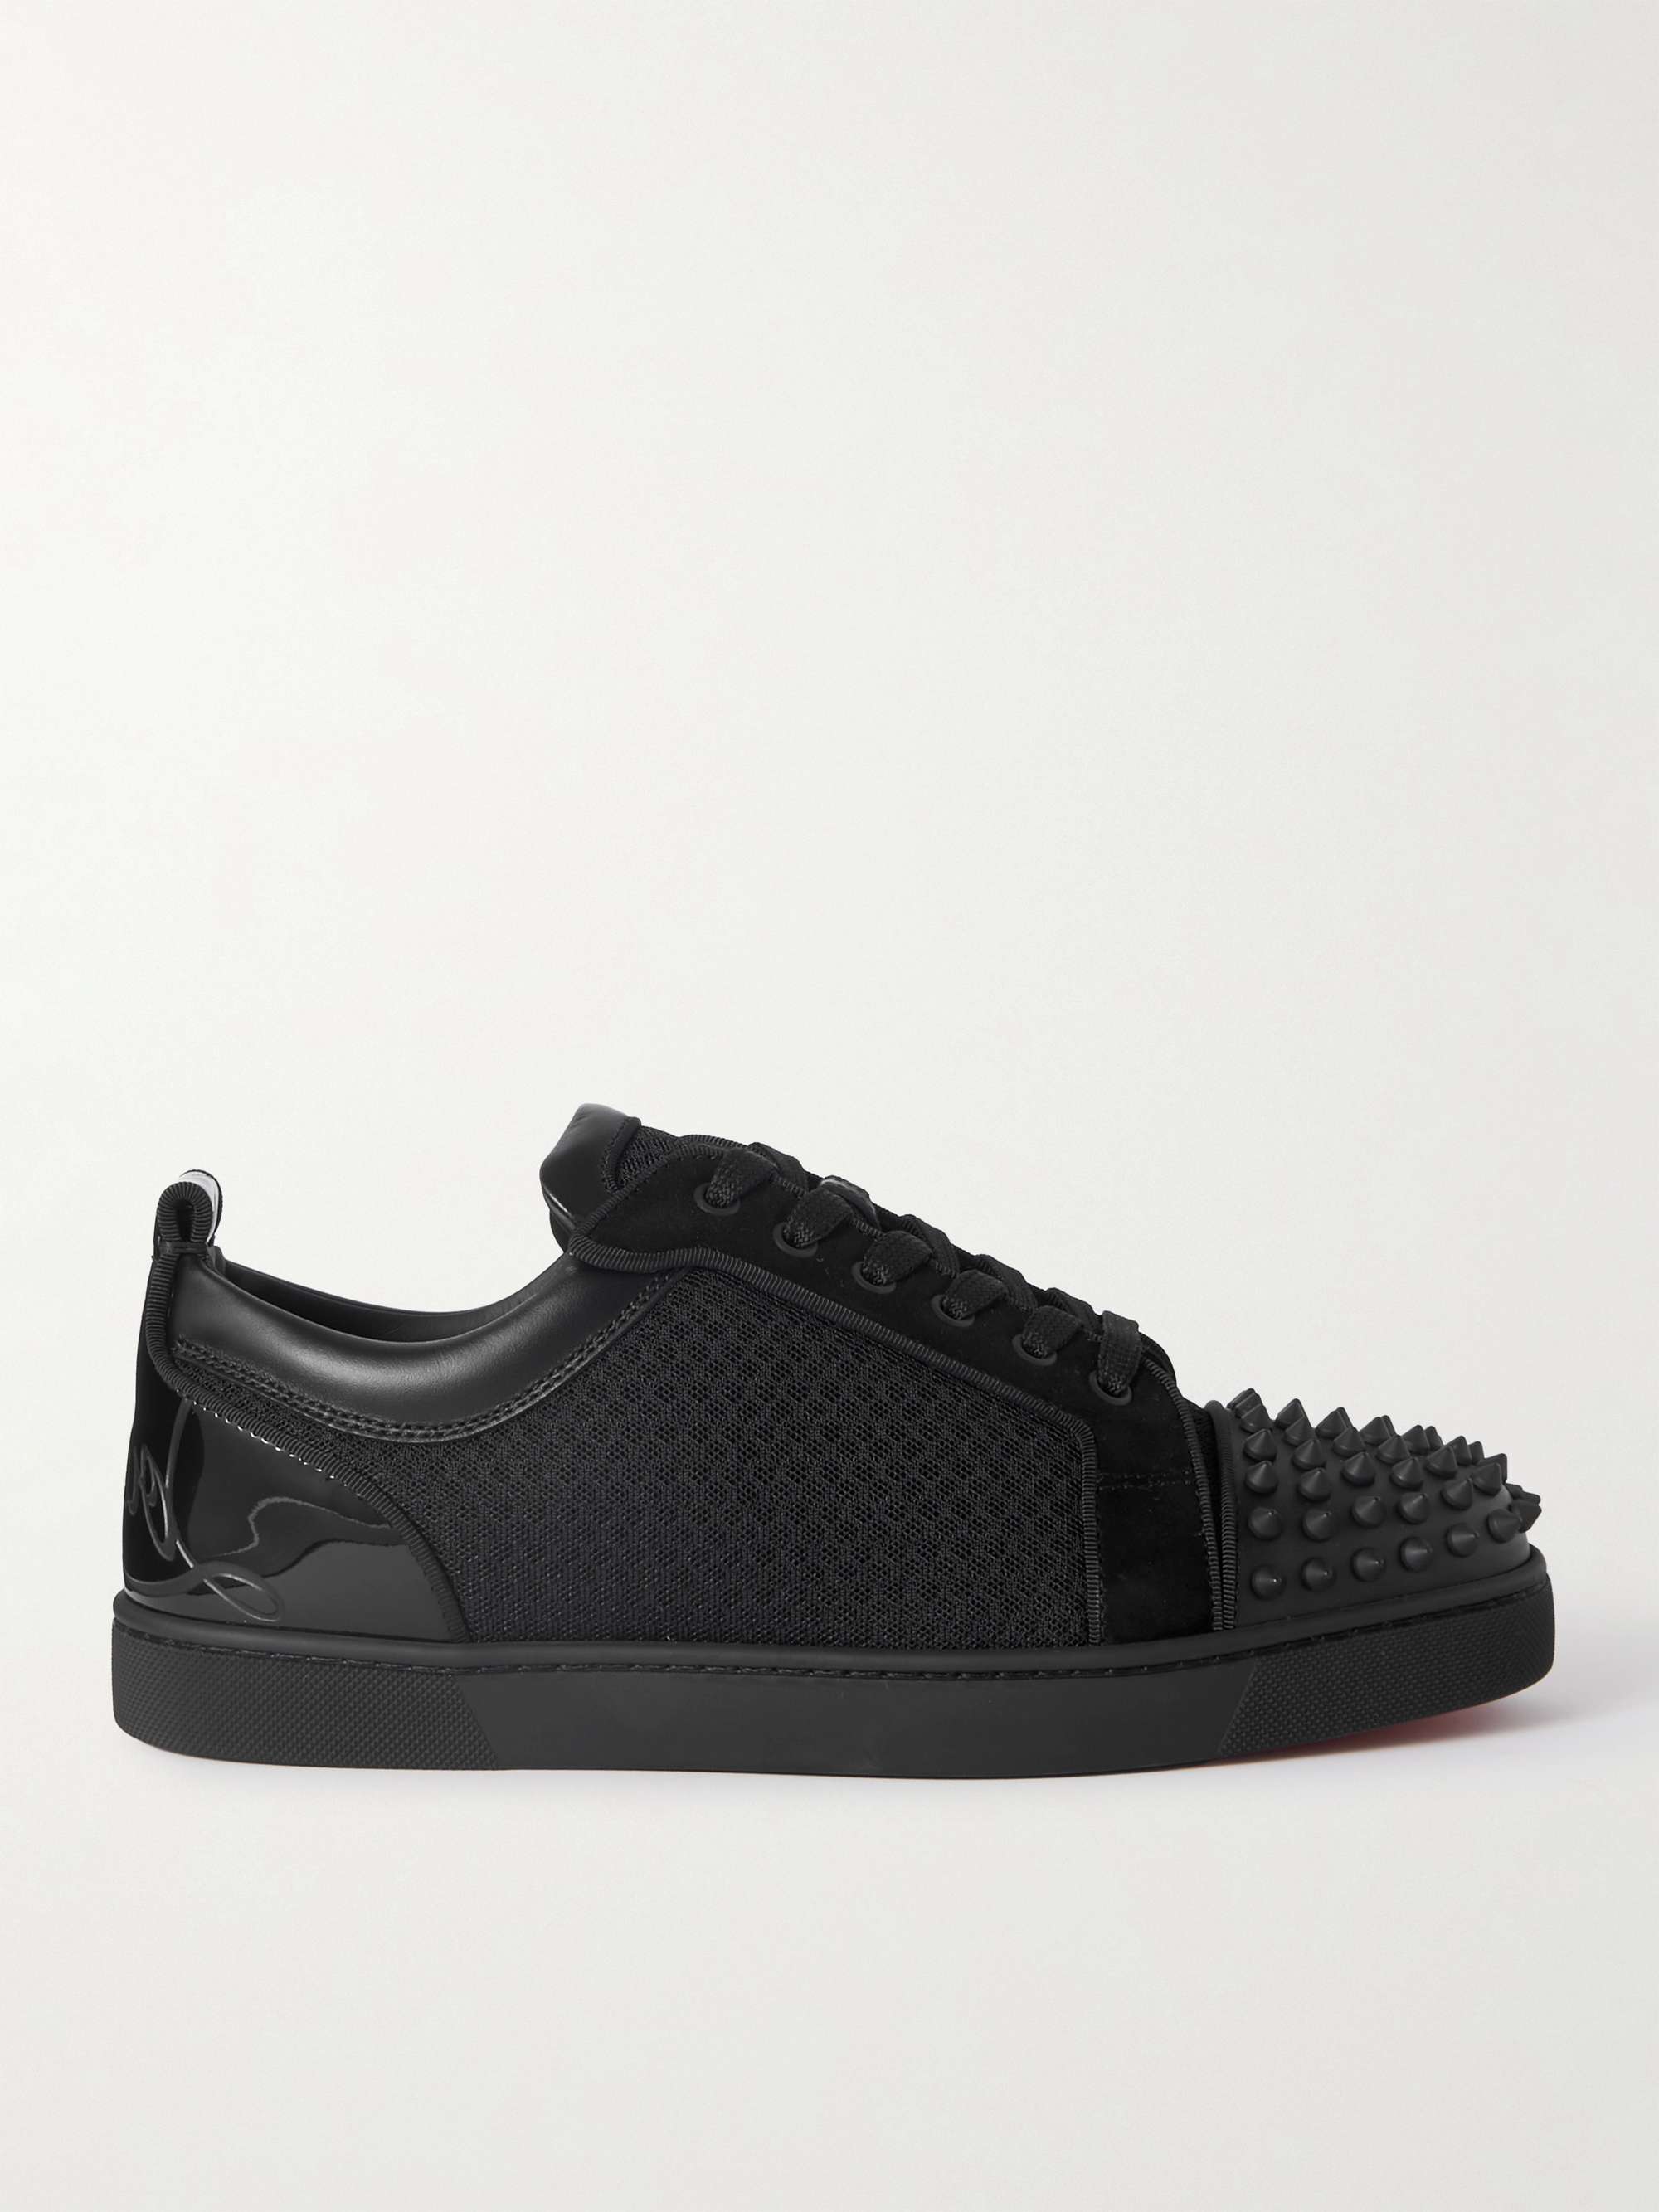 Sneaker of the Week: Christian Louboutin Studded Sneakers